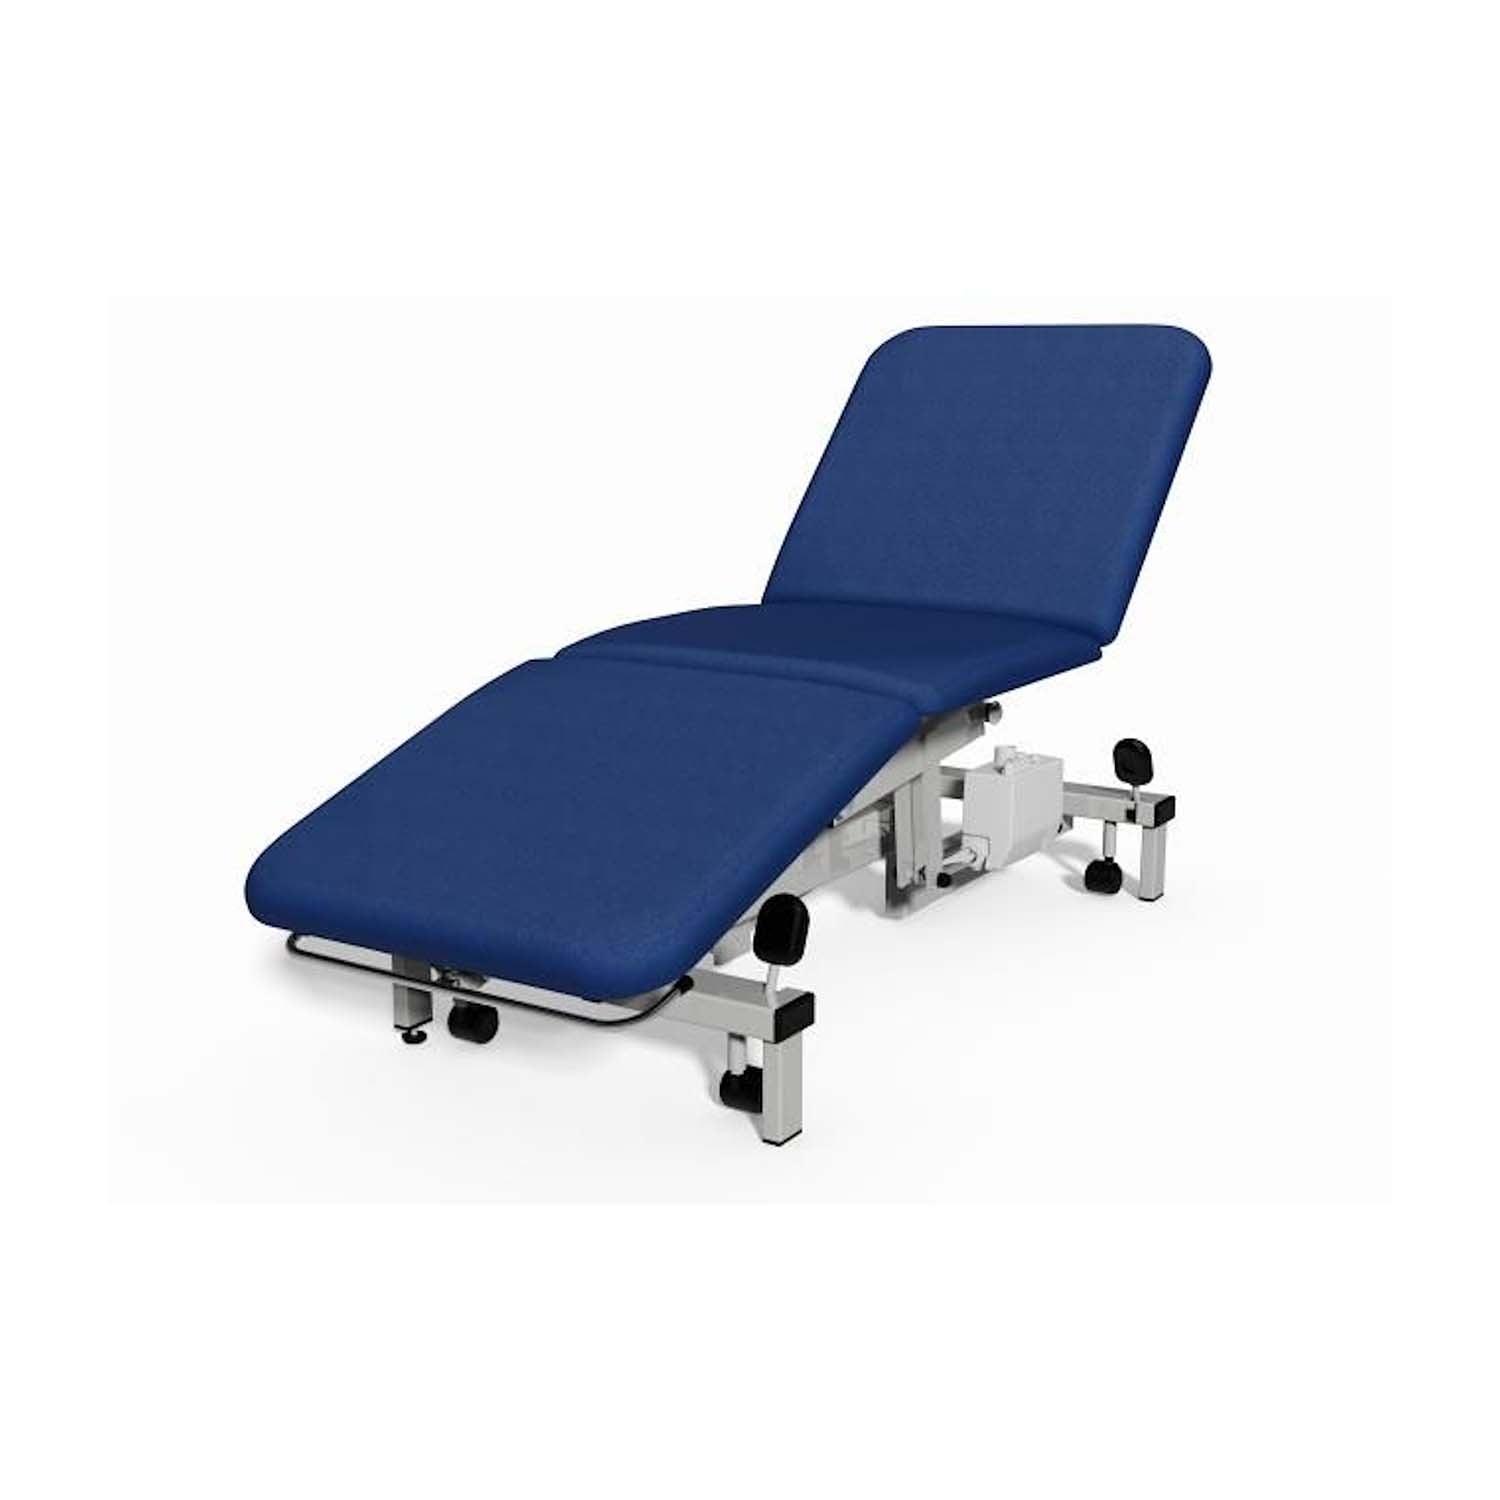 Plinth 2000 Model 503 3 Section Examination Couch | Hydraulic | Sapphire